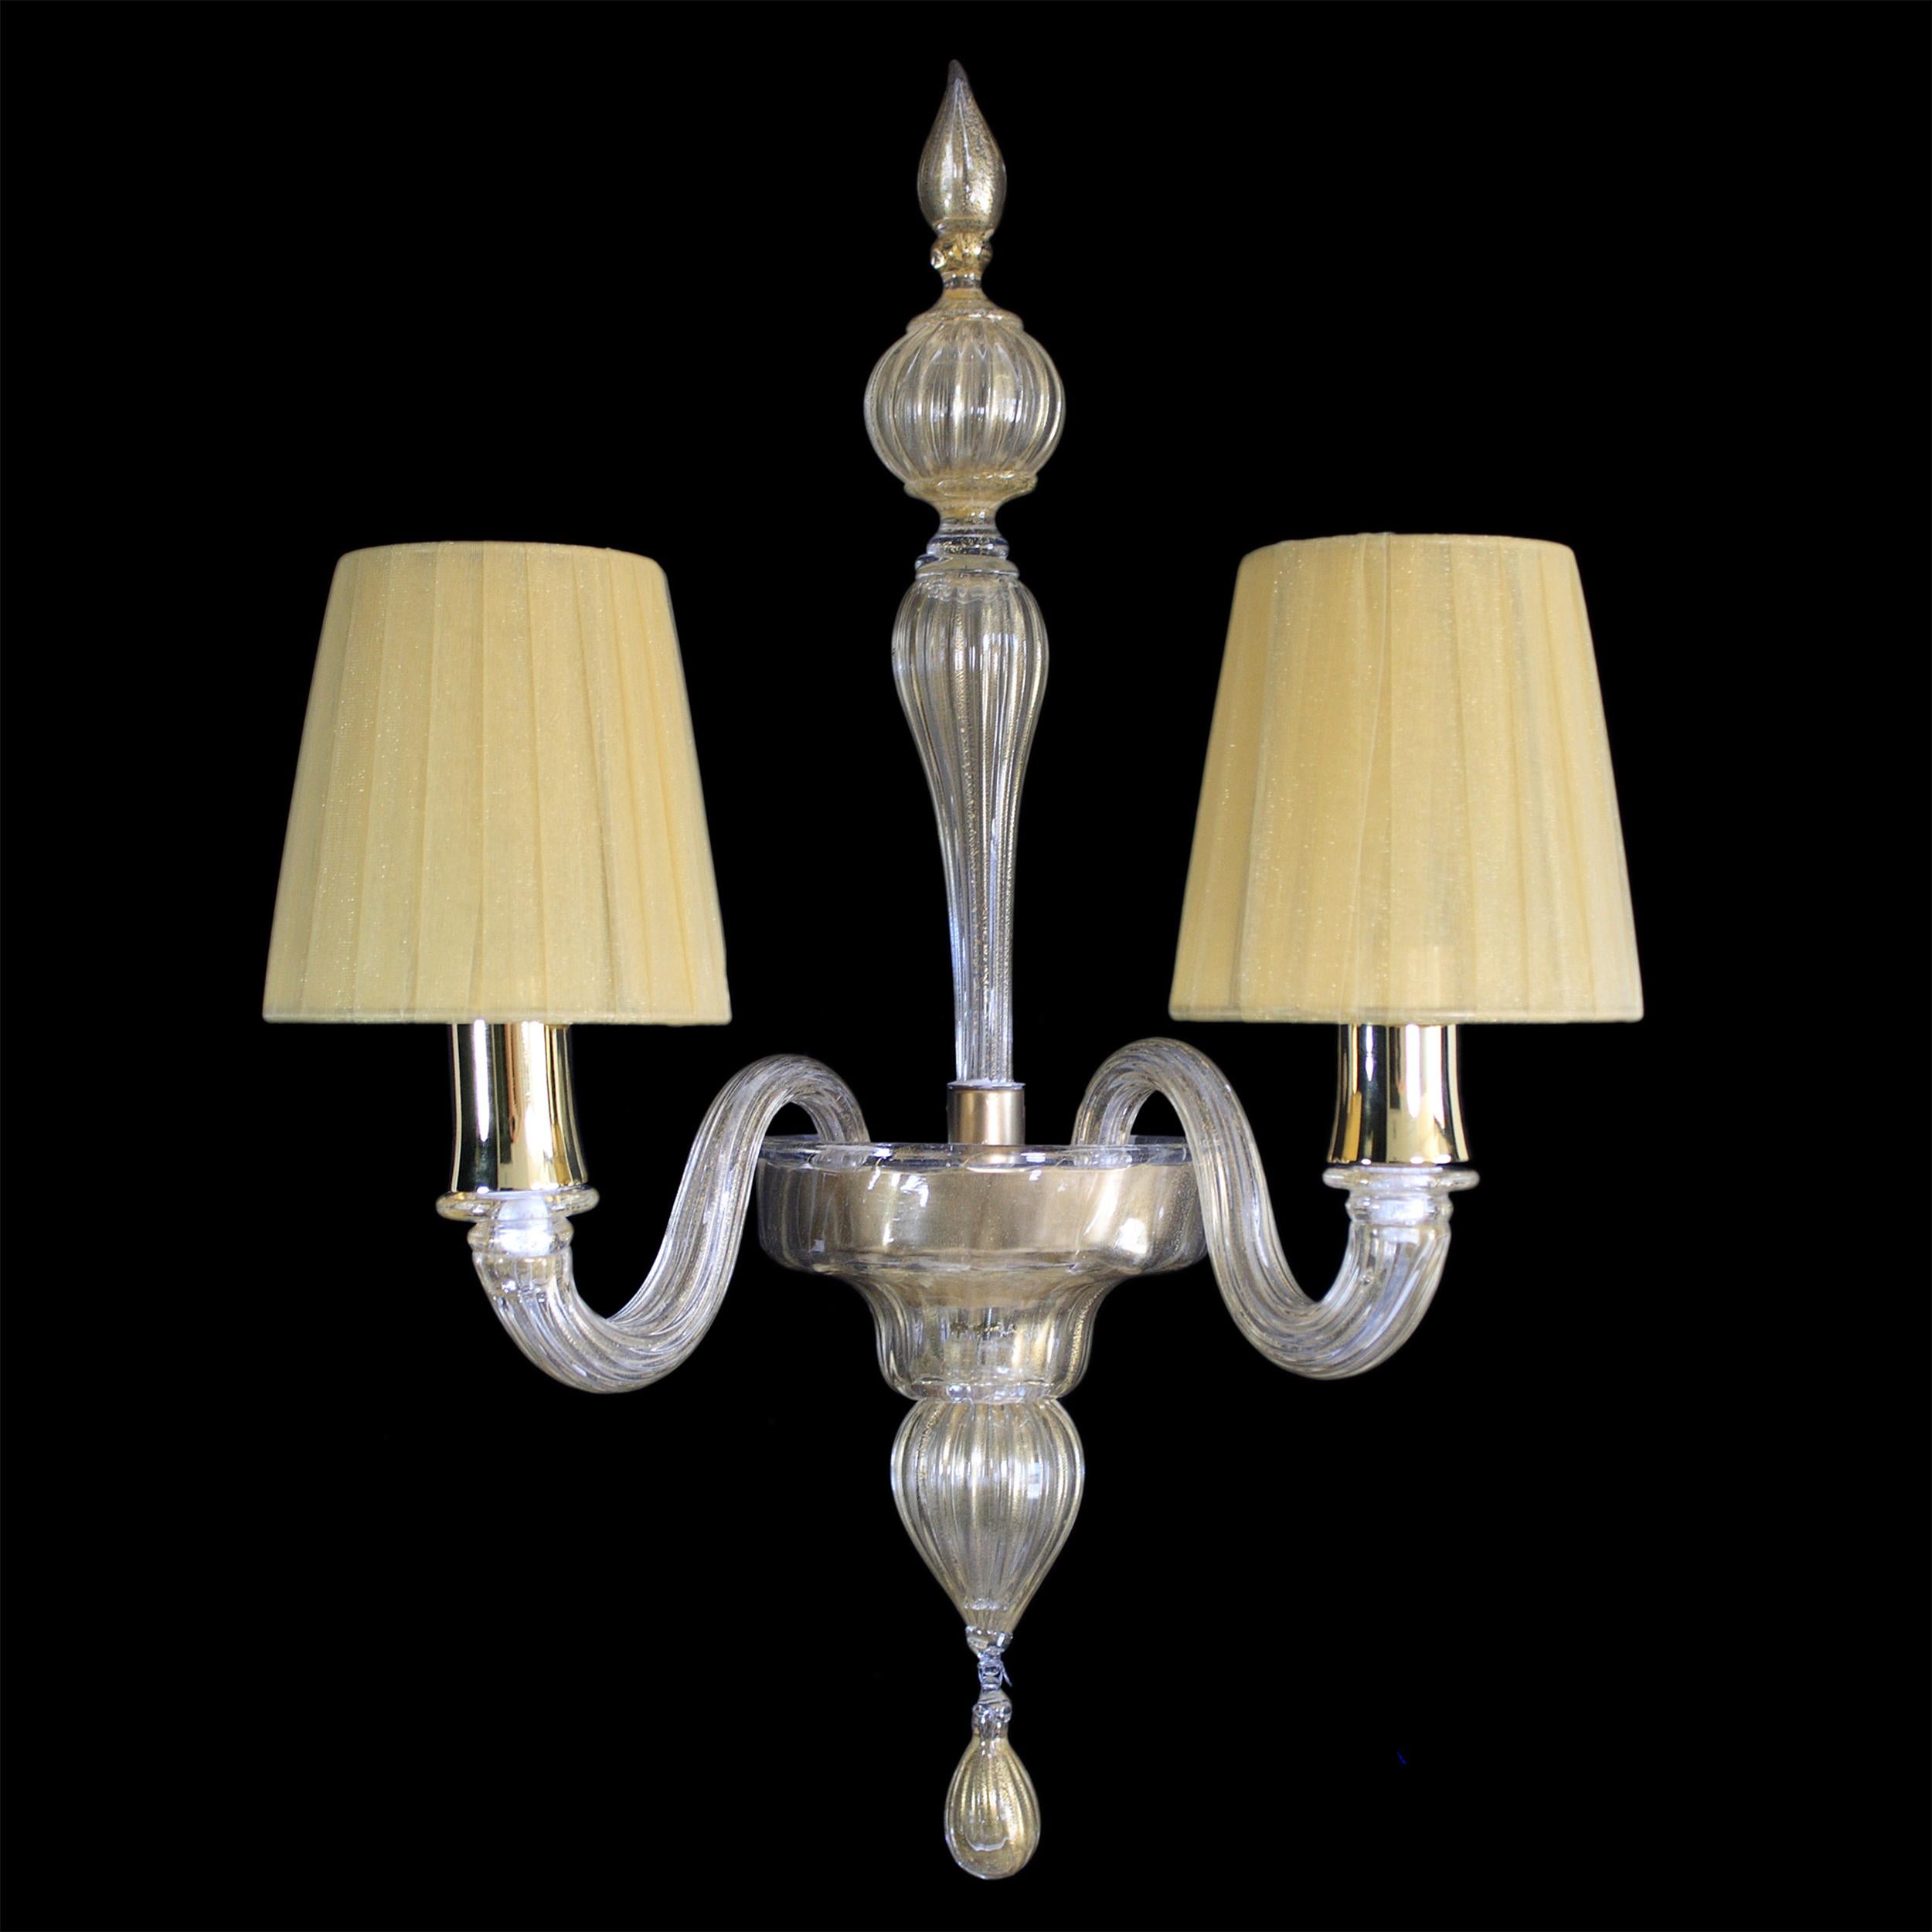 Chapeau is a classic and essential collection; it is handcrafted using high quality materials in Murano glass and handmade organza lampshades.
This murano glass sconce is finished with handmade lampshades, and it is available in many different